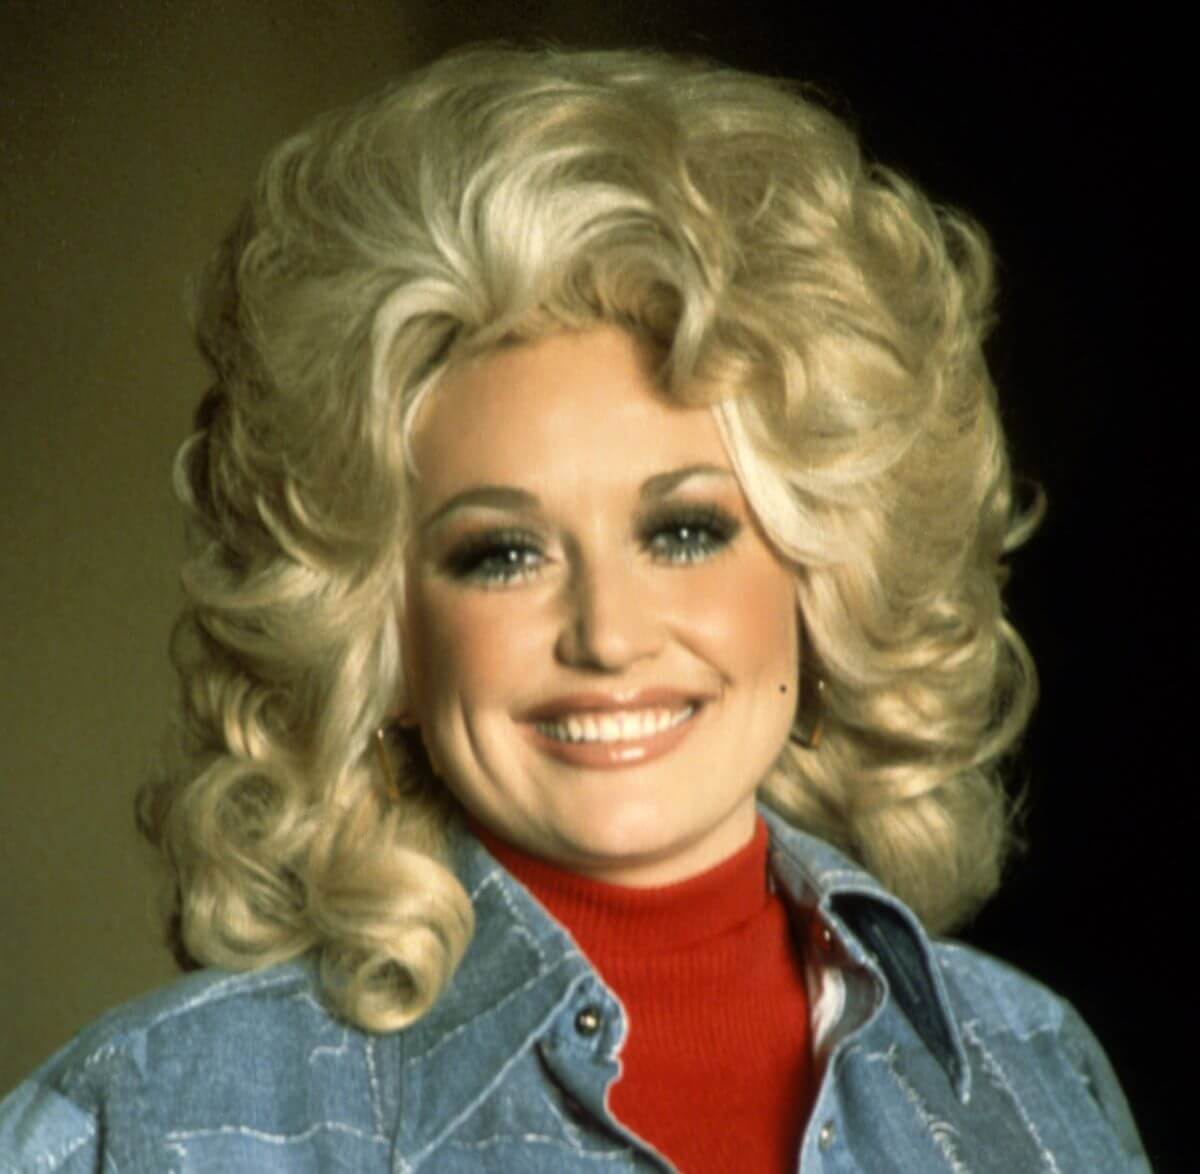 Dolly Parton wears a red shirt and a denim jacket. She smiles.